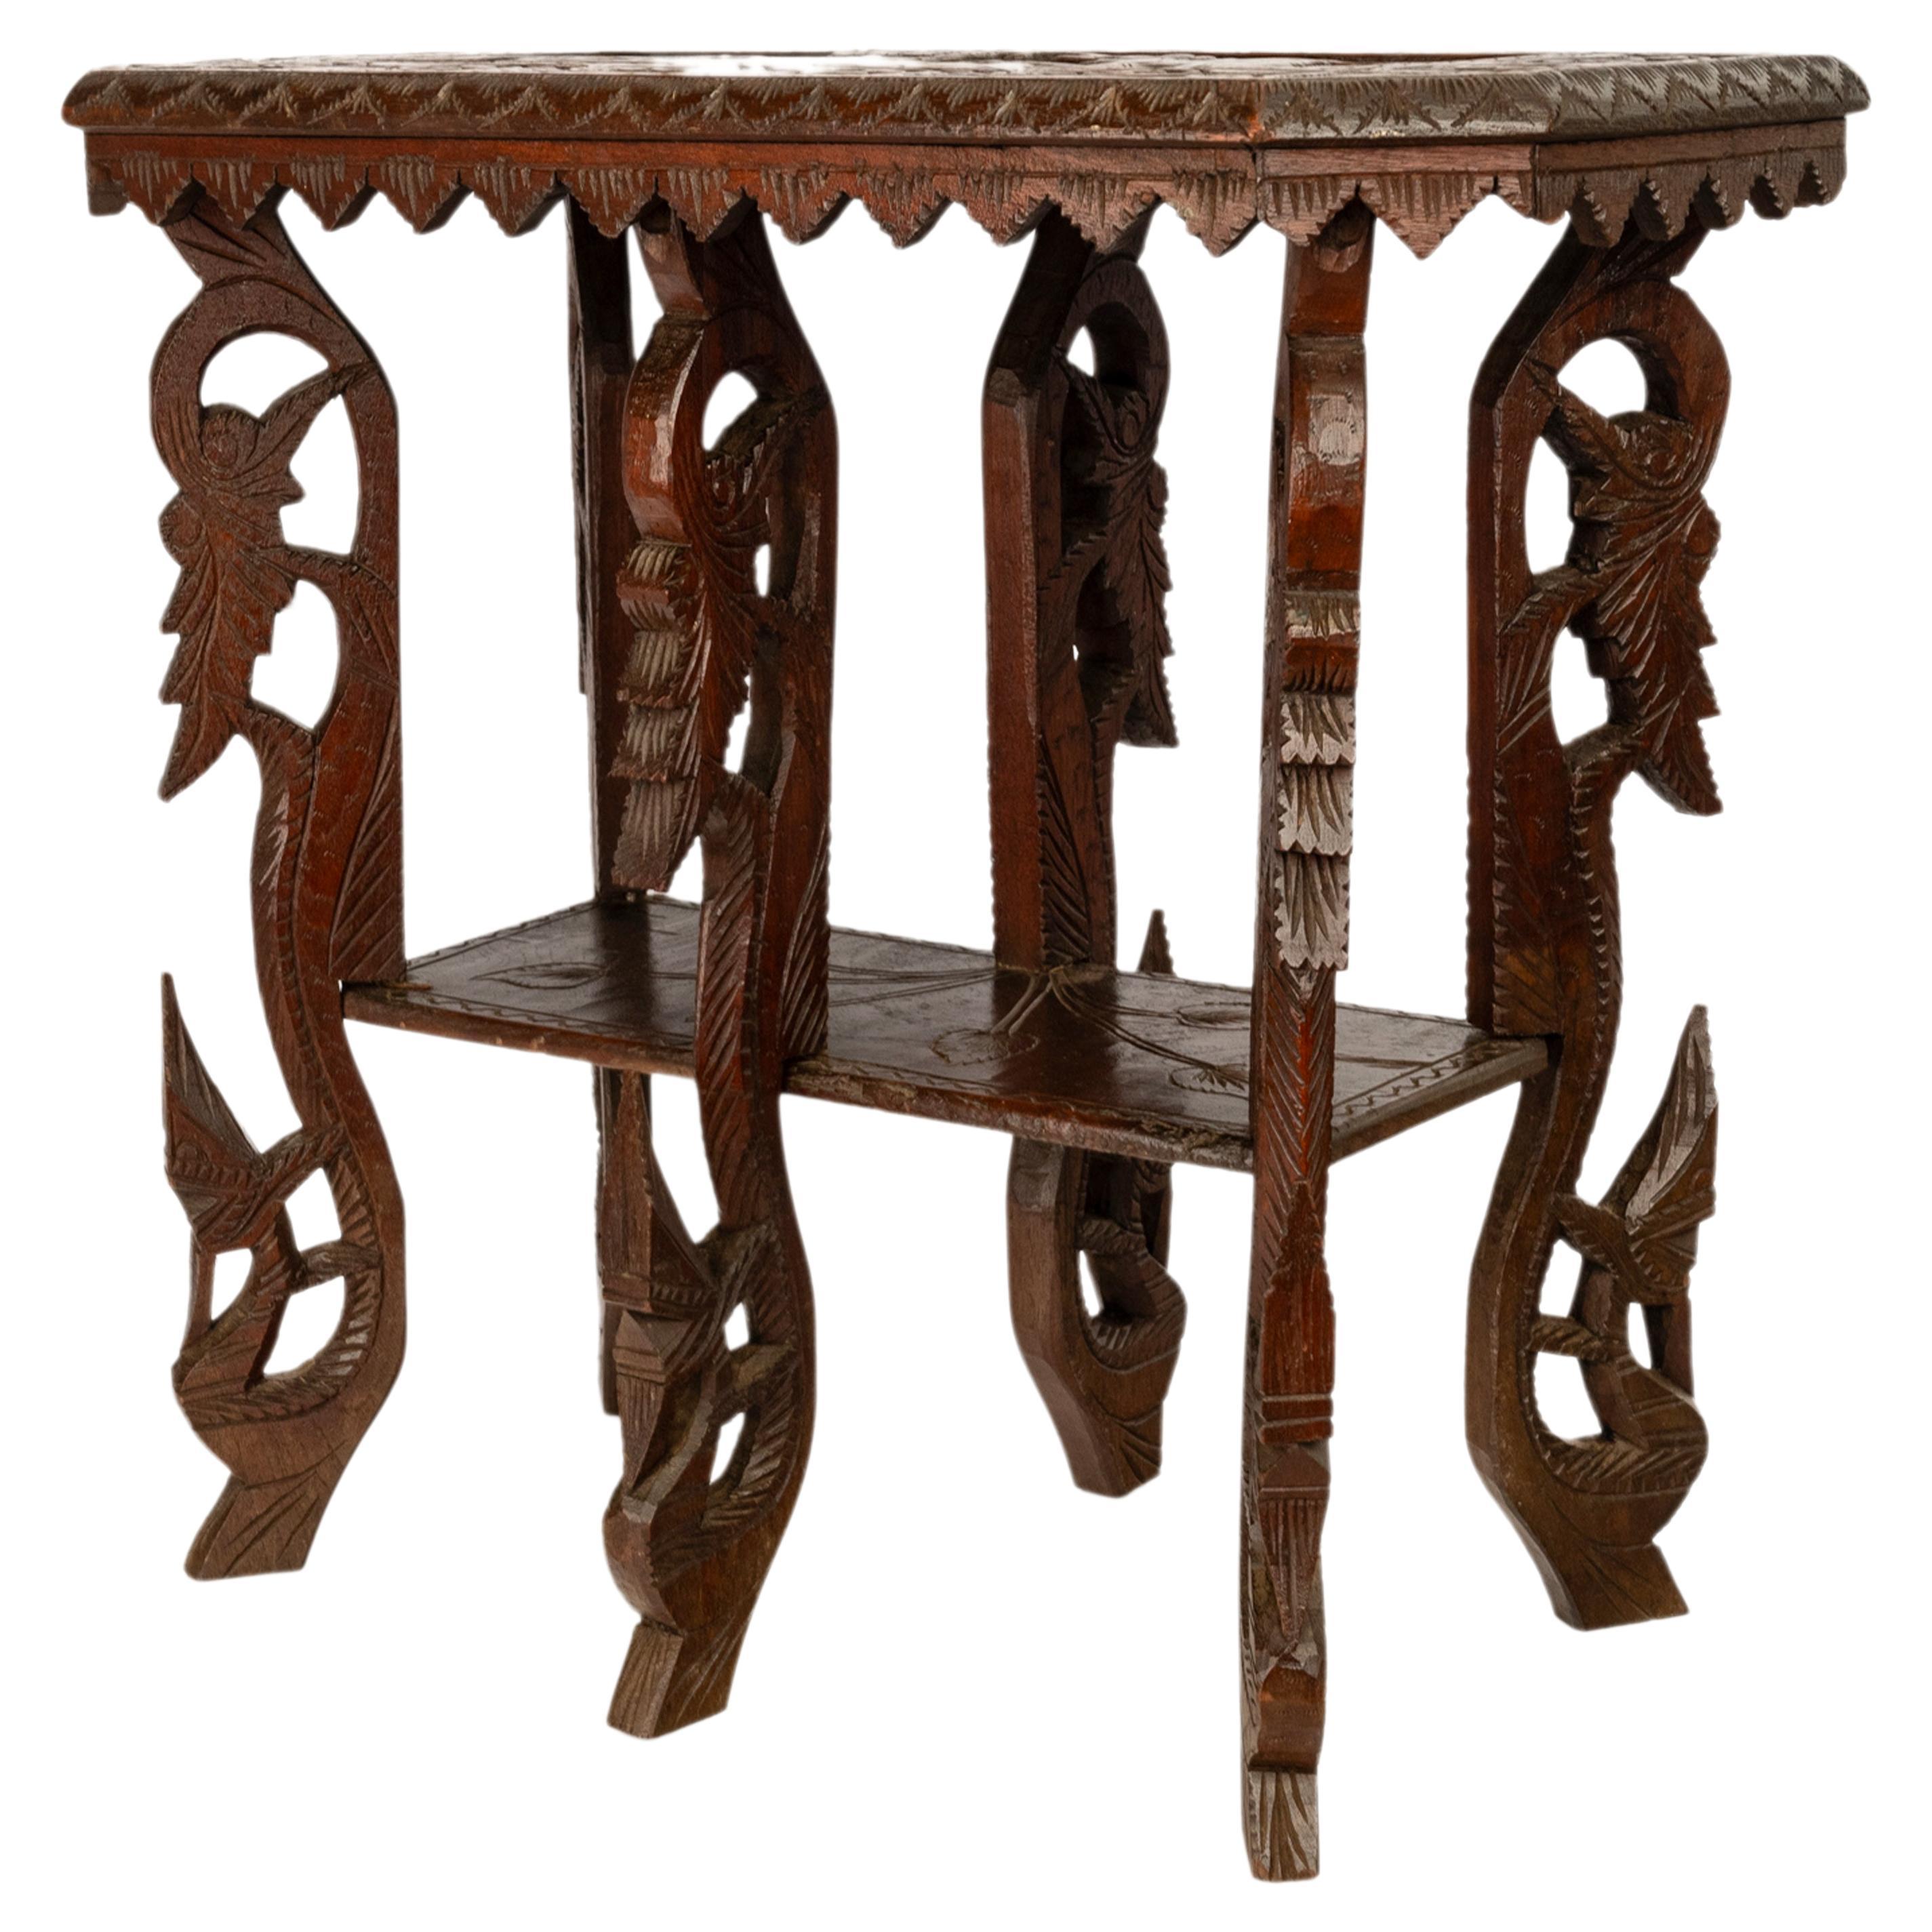 A rare and unusual antique Anglo Indian carved side table, circa 1900.
The table of a rare form & raised on six heavily carved legs in an organic style and supporting a lower tier carved with an Indian peepal leaf design. The table top is very well